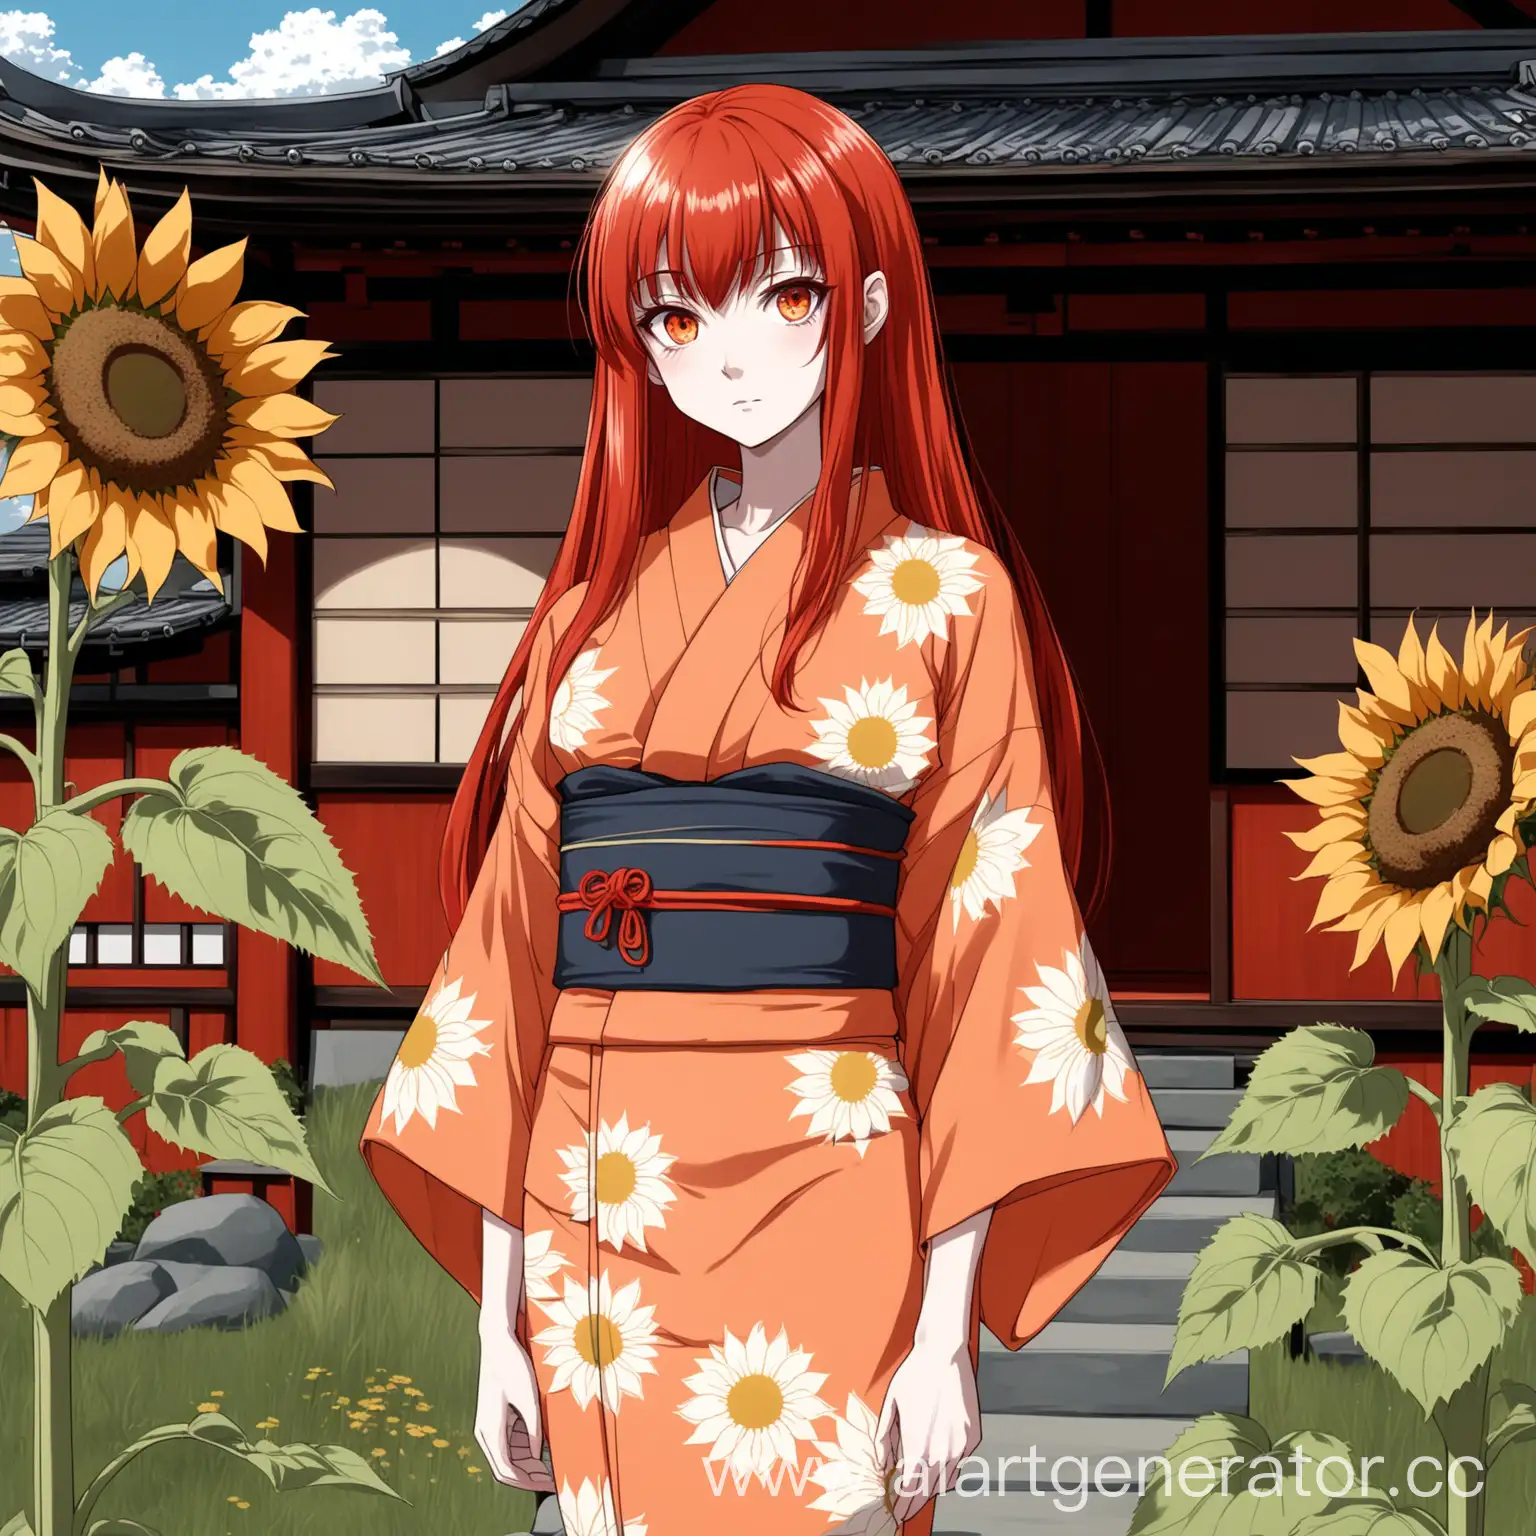 Anime-Girl-with-Long-Red-Hair-in-Sunflower-Kimono